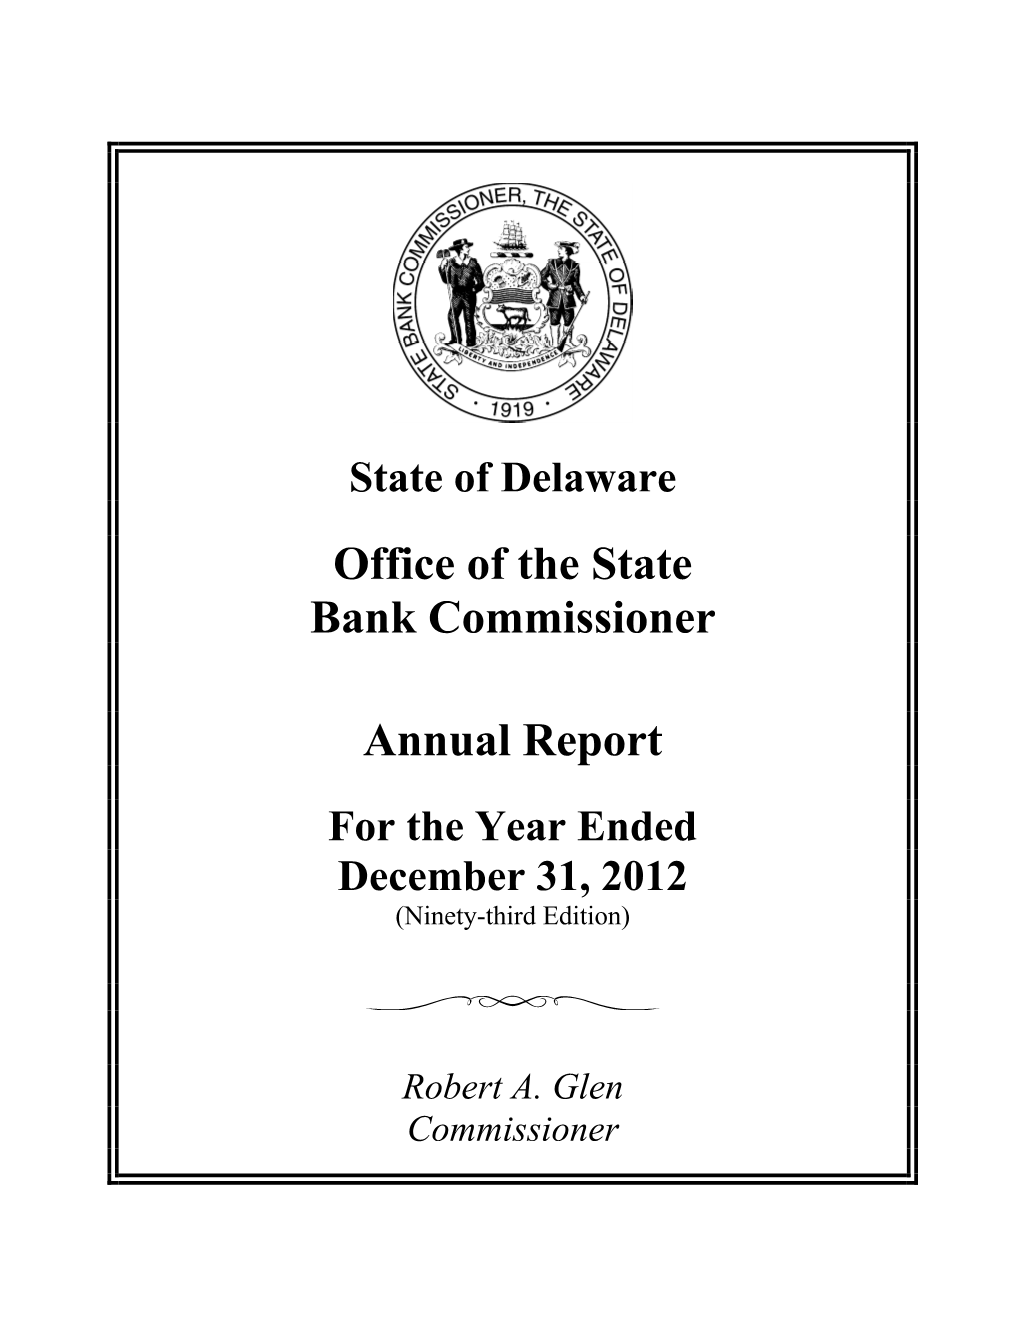 Office of the State Bank Commissioner Annual Report